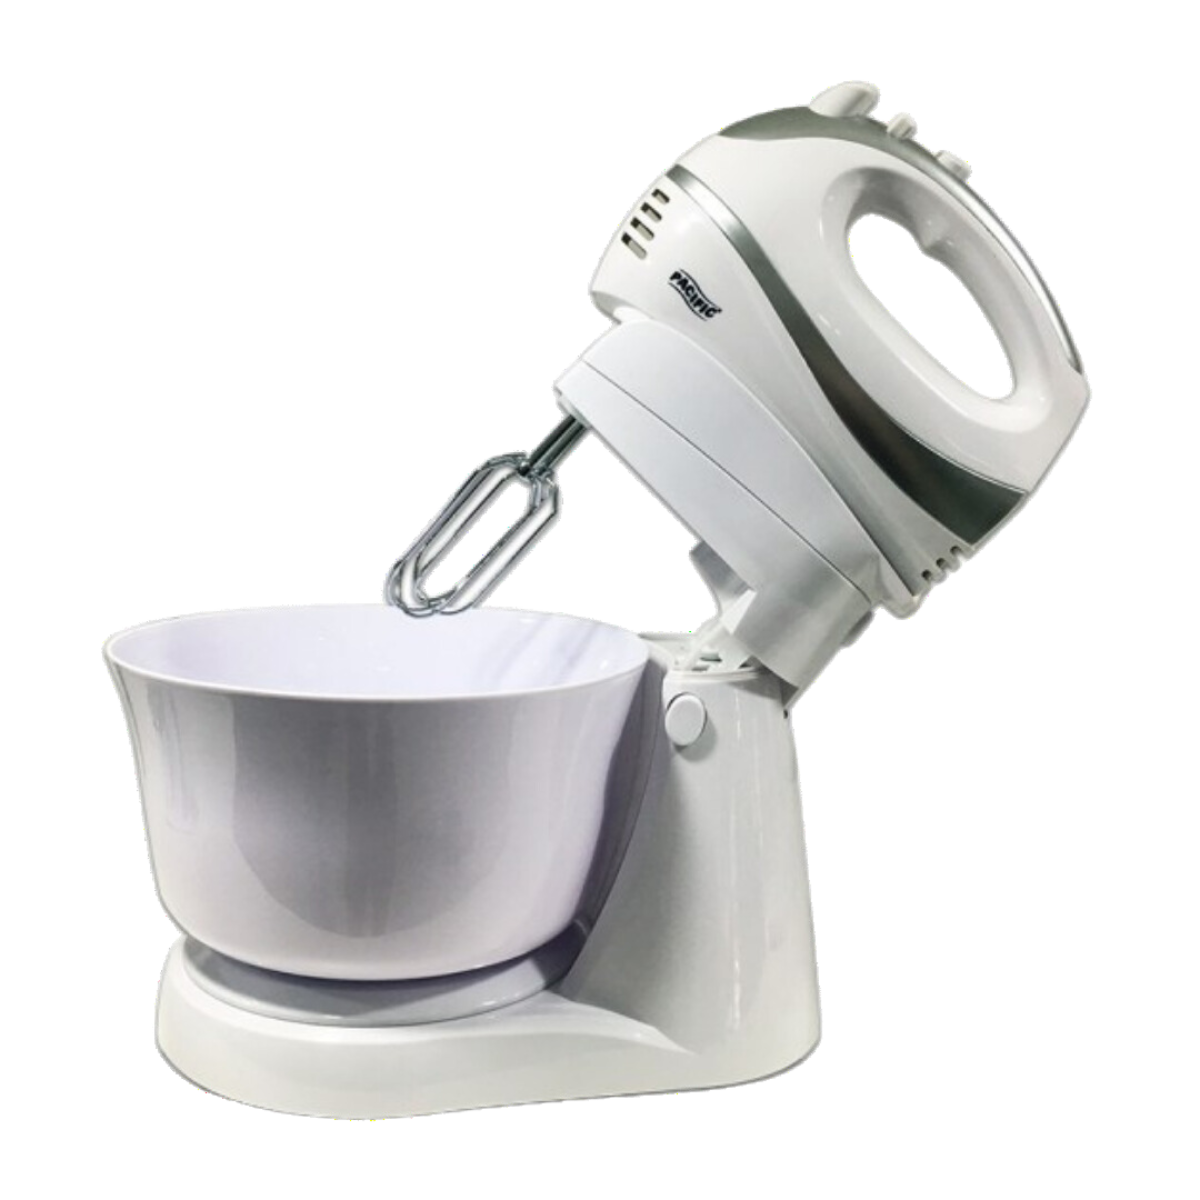 PACIFIC PM500 STAND MIXER